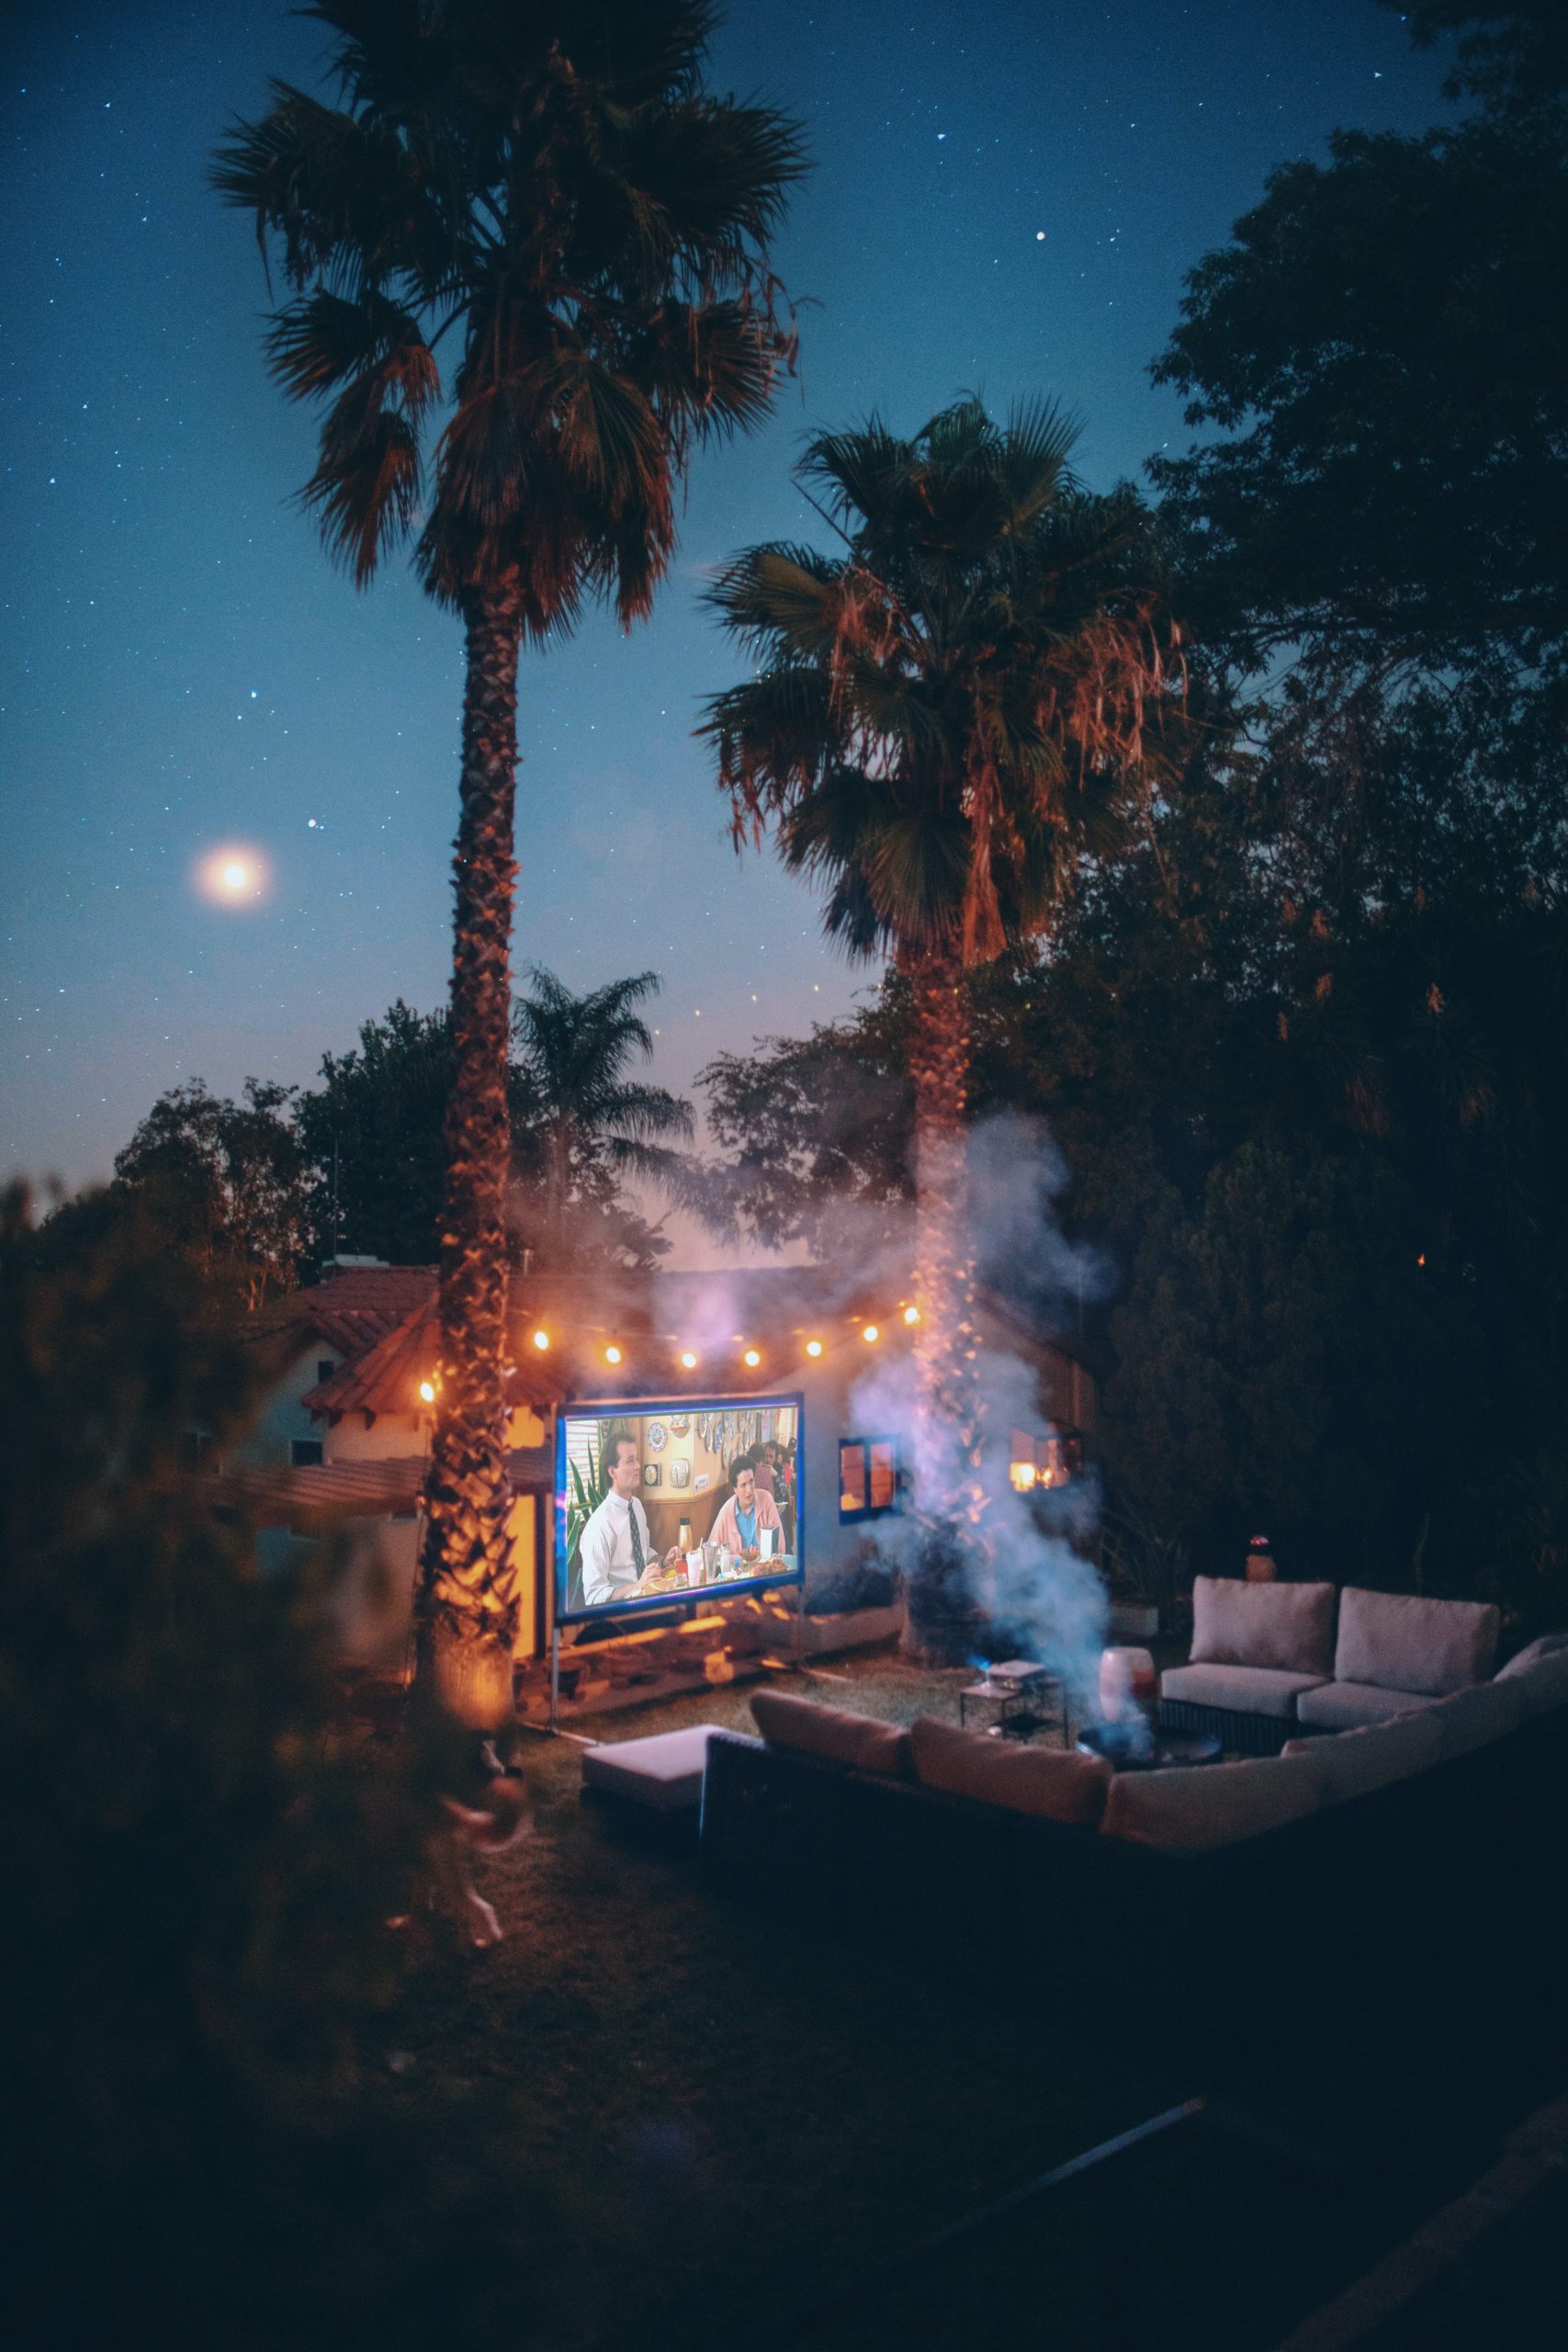 outdoor movie viewing set up